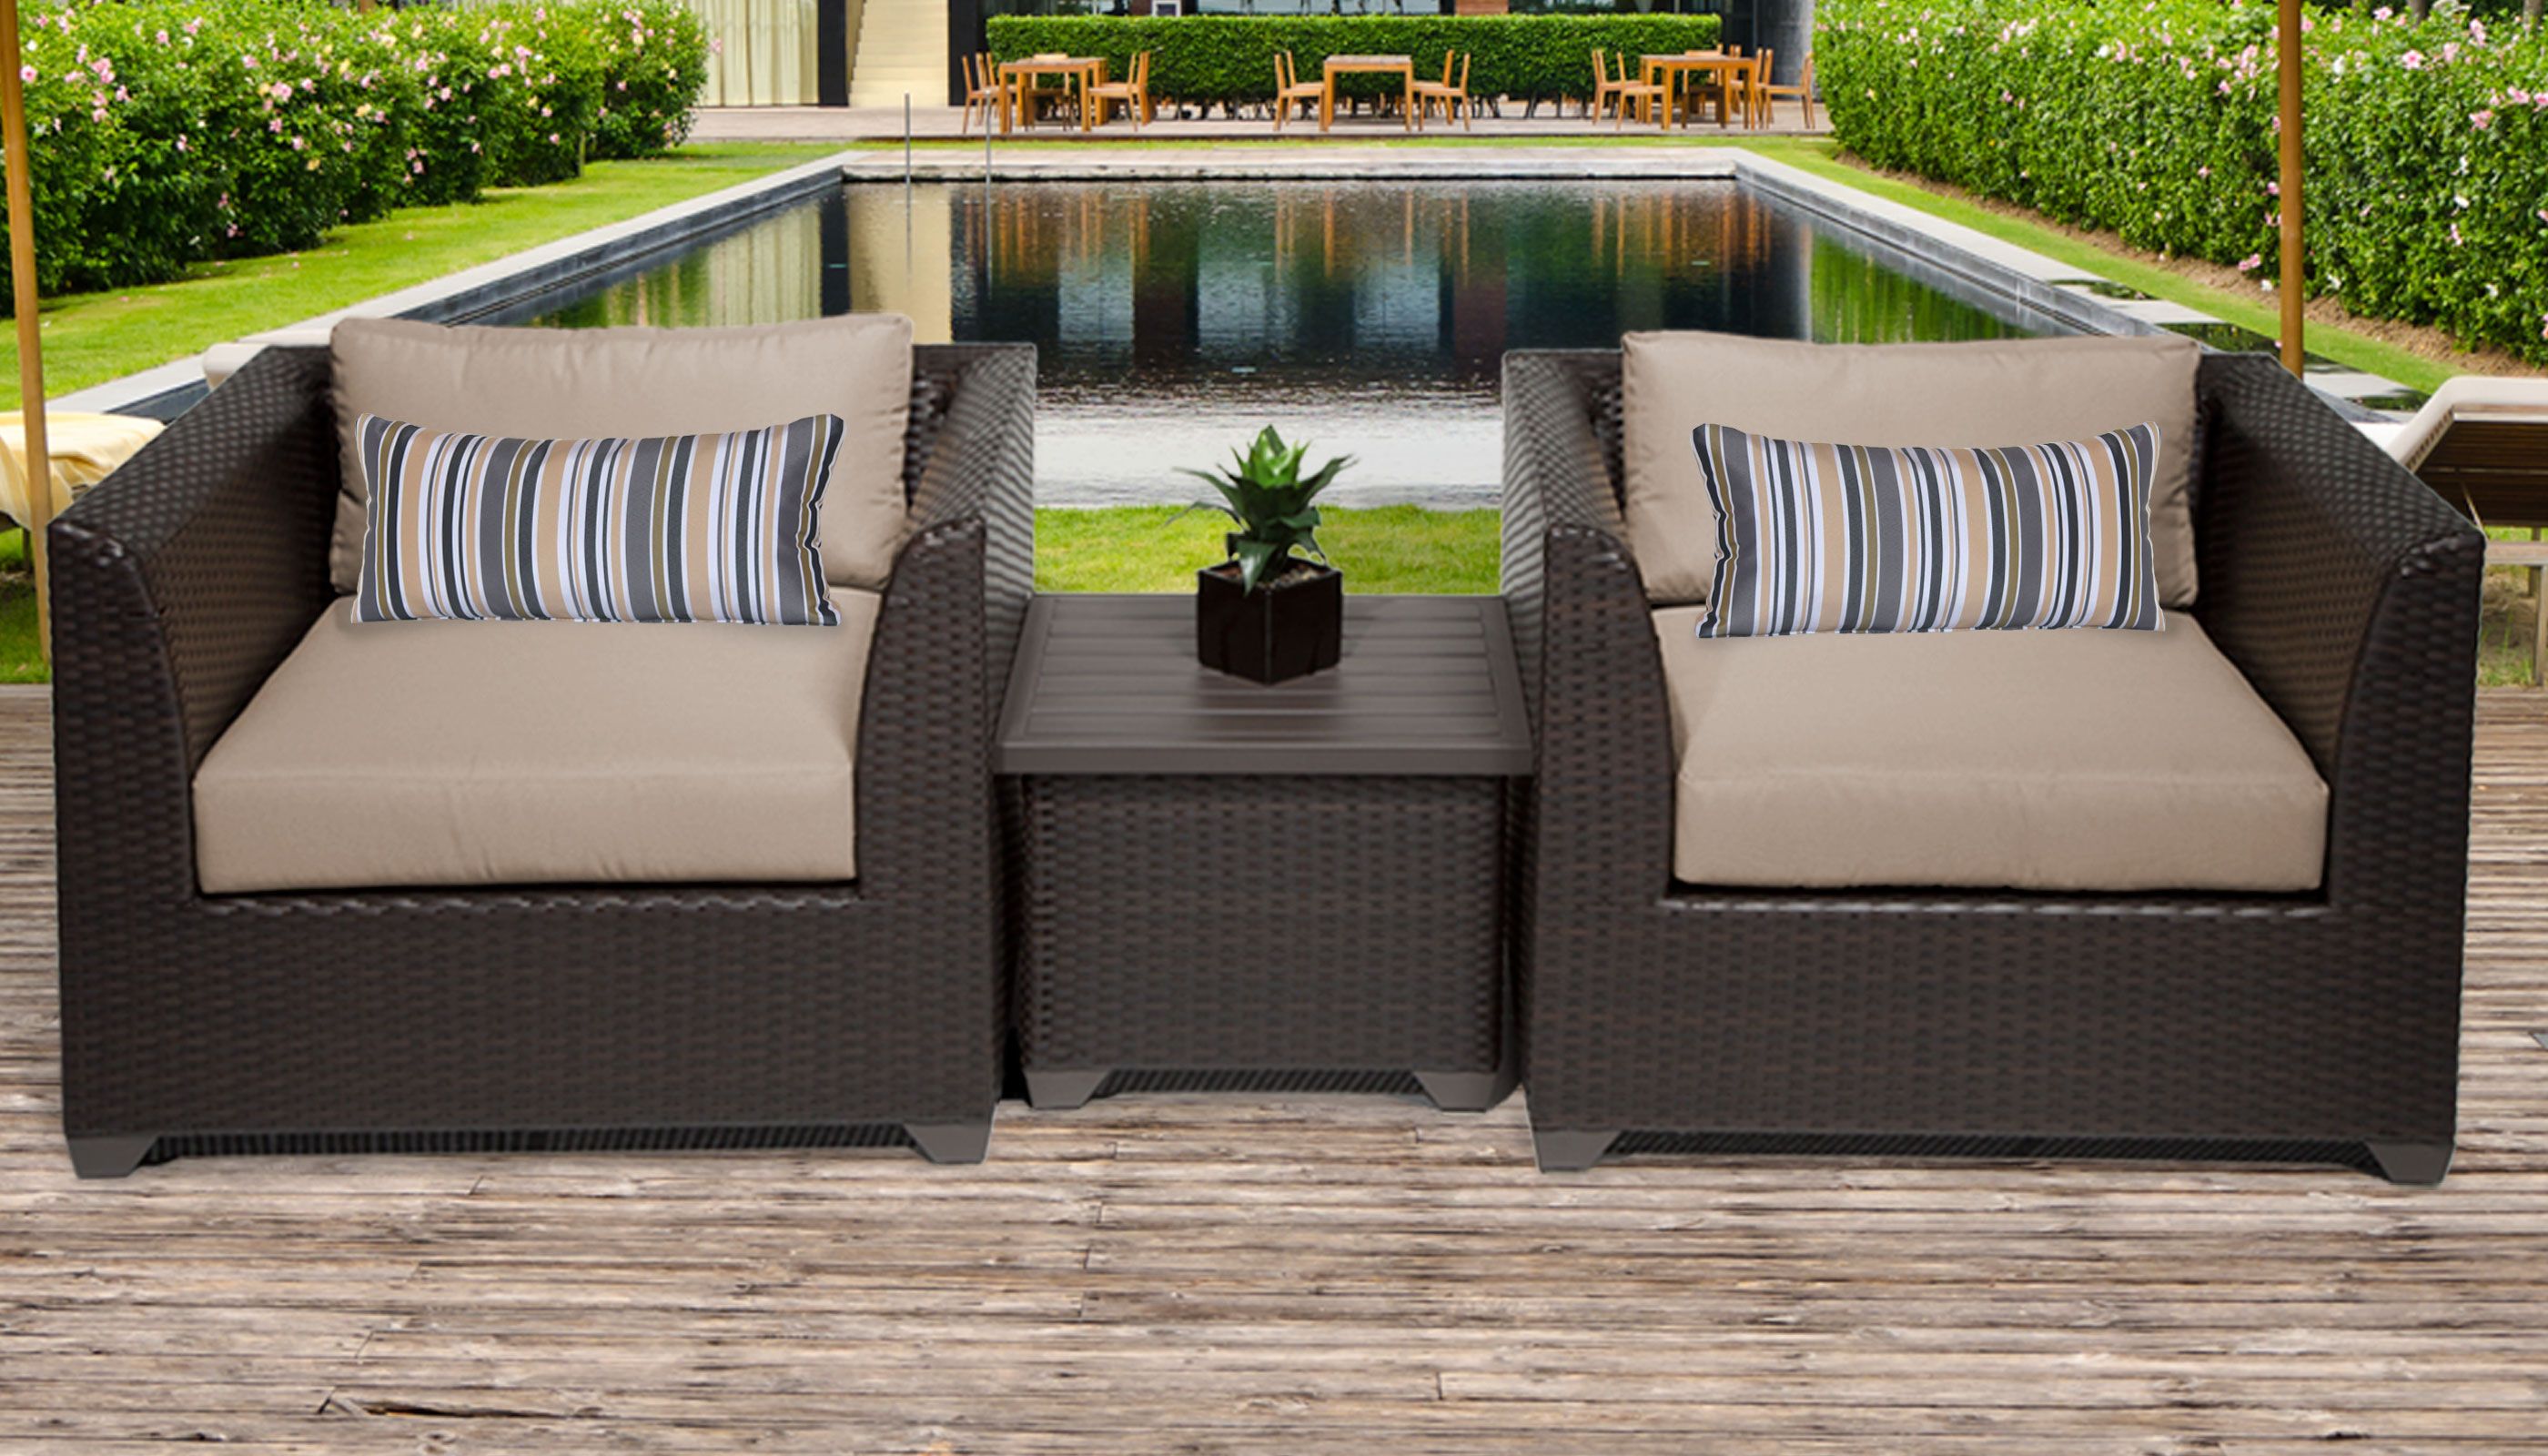 Outdoor Wicker 3 Piece Set Pertaining To Recent Barbados 3 Piece Outdoor Wicker Patio Furniture Set 03a (View 5 of 15)